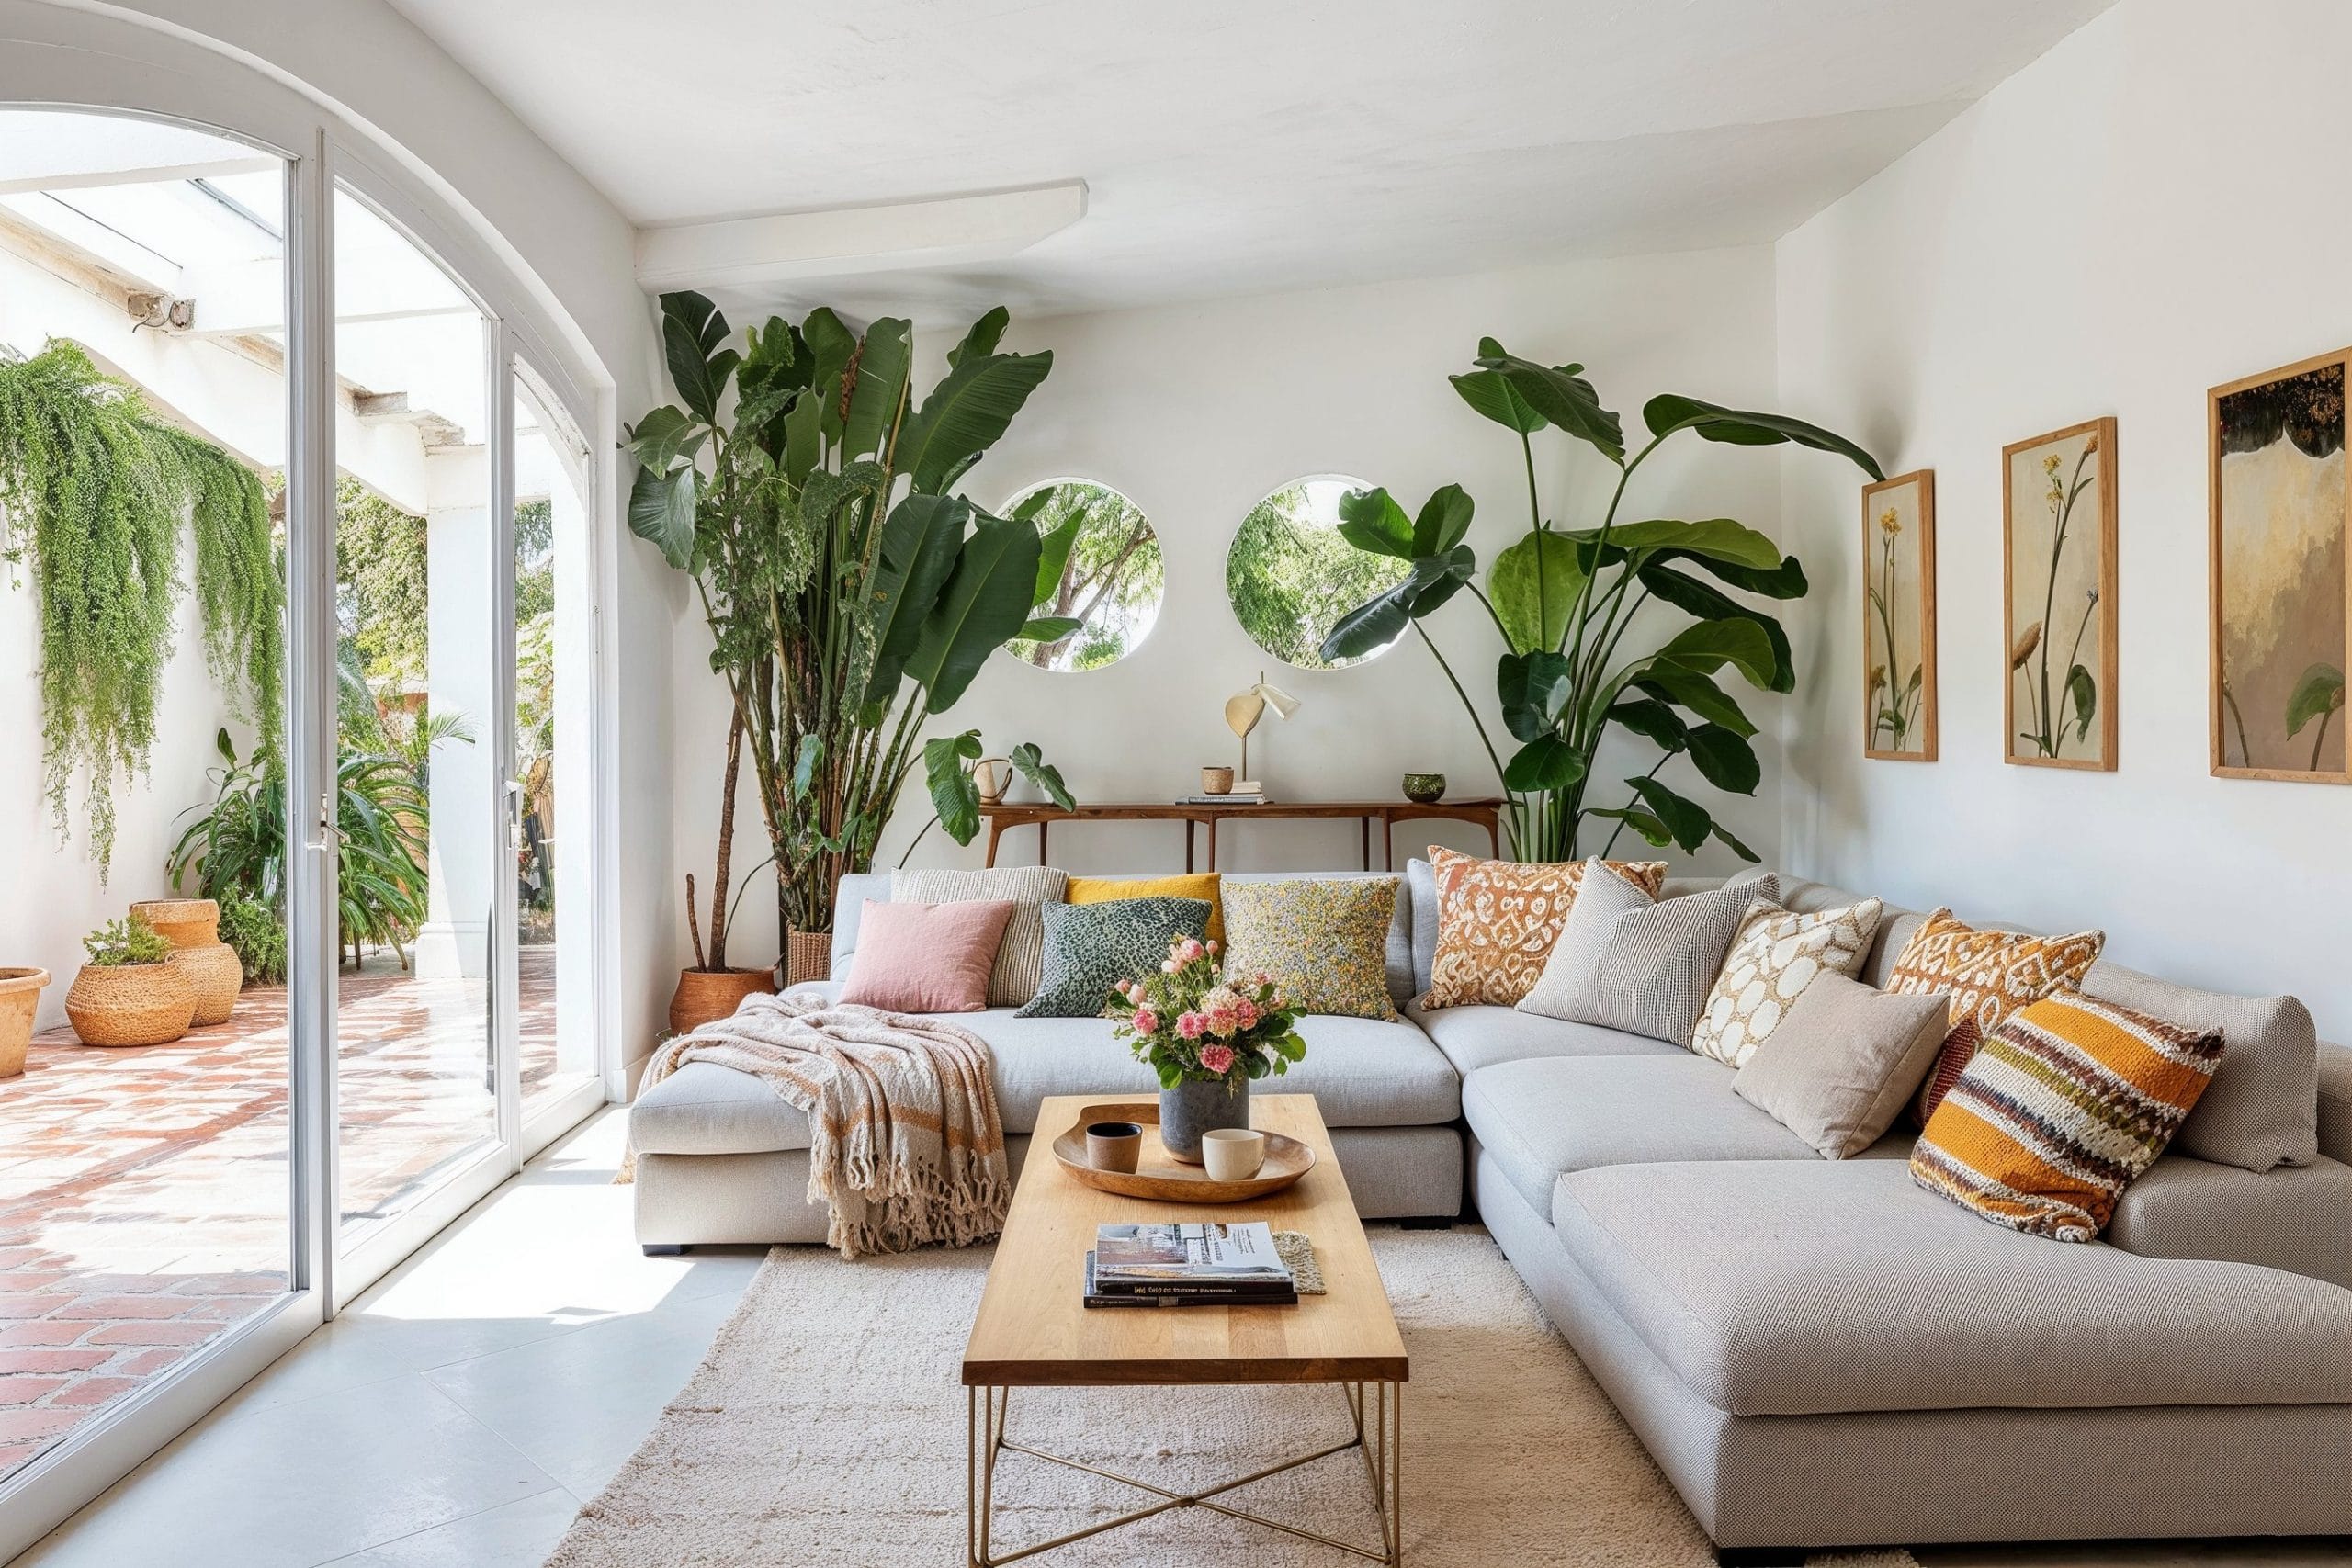 Create a Boho Chic Home with 7 Essential Elements